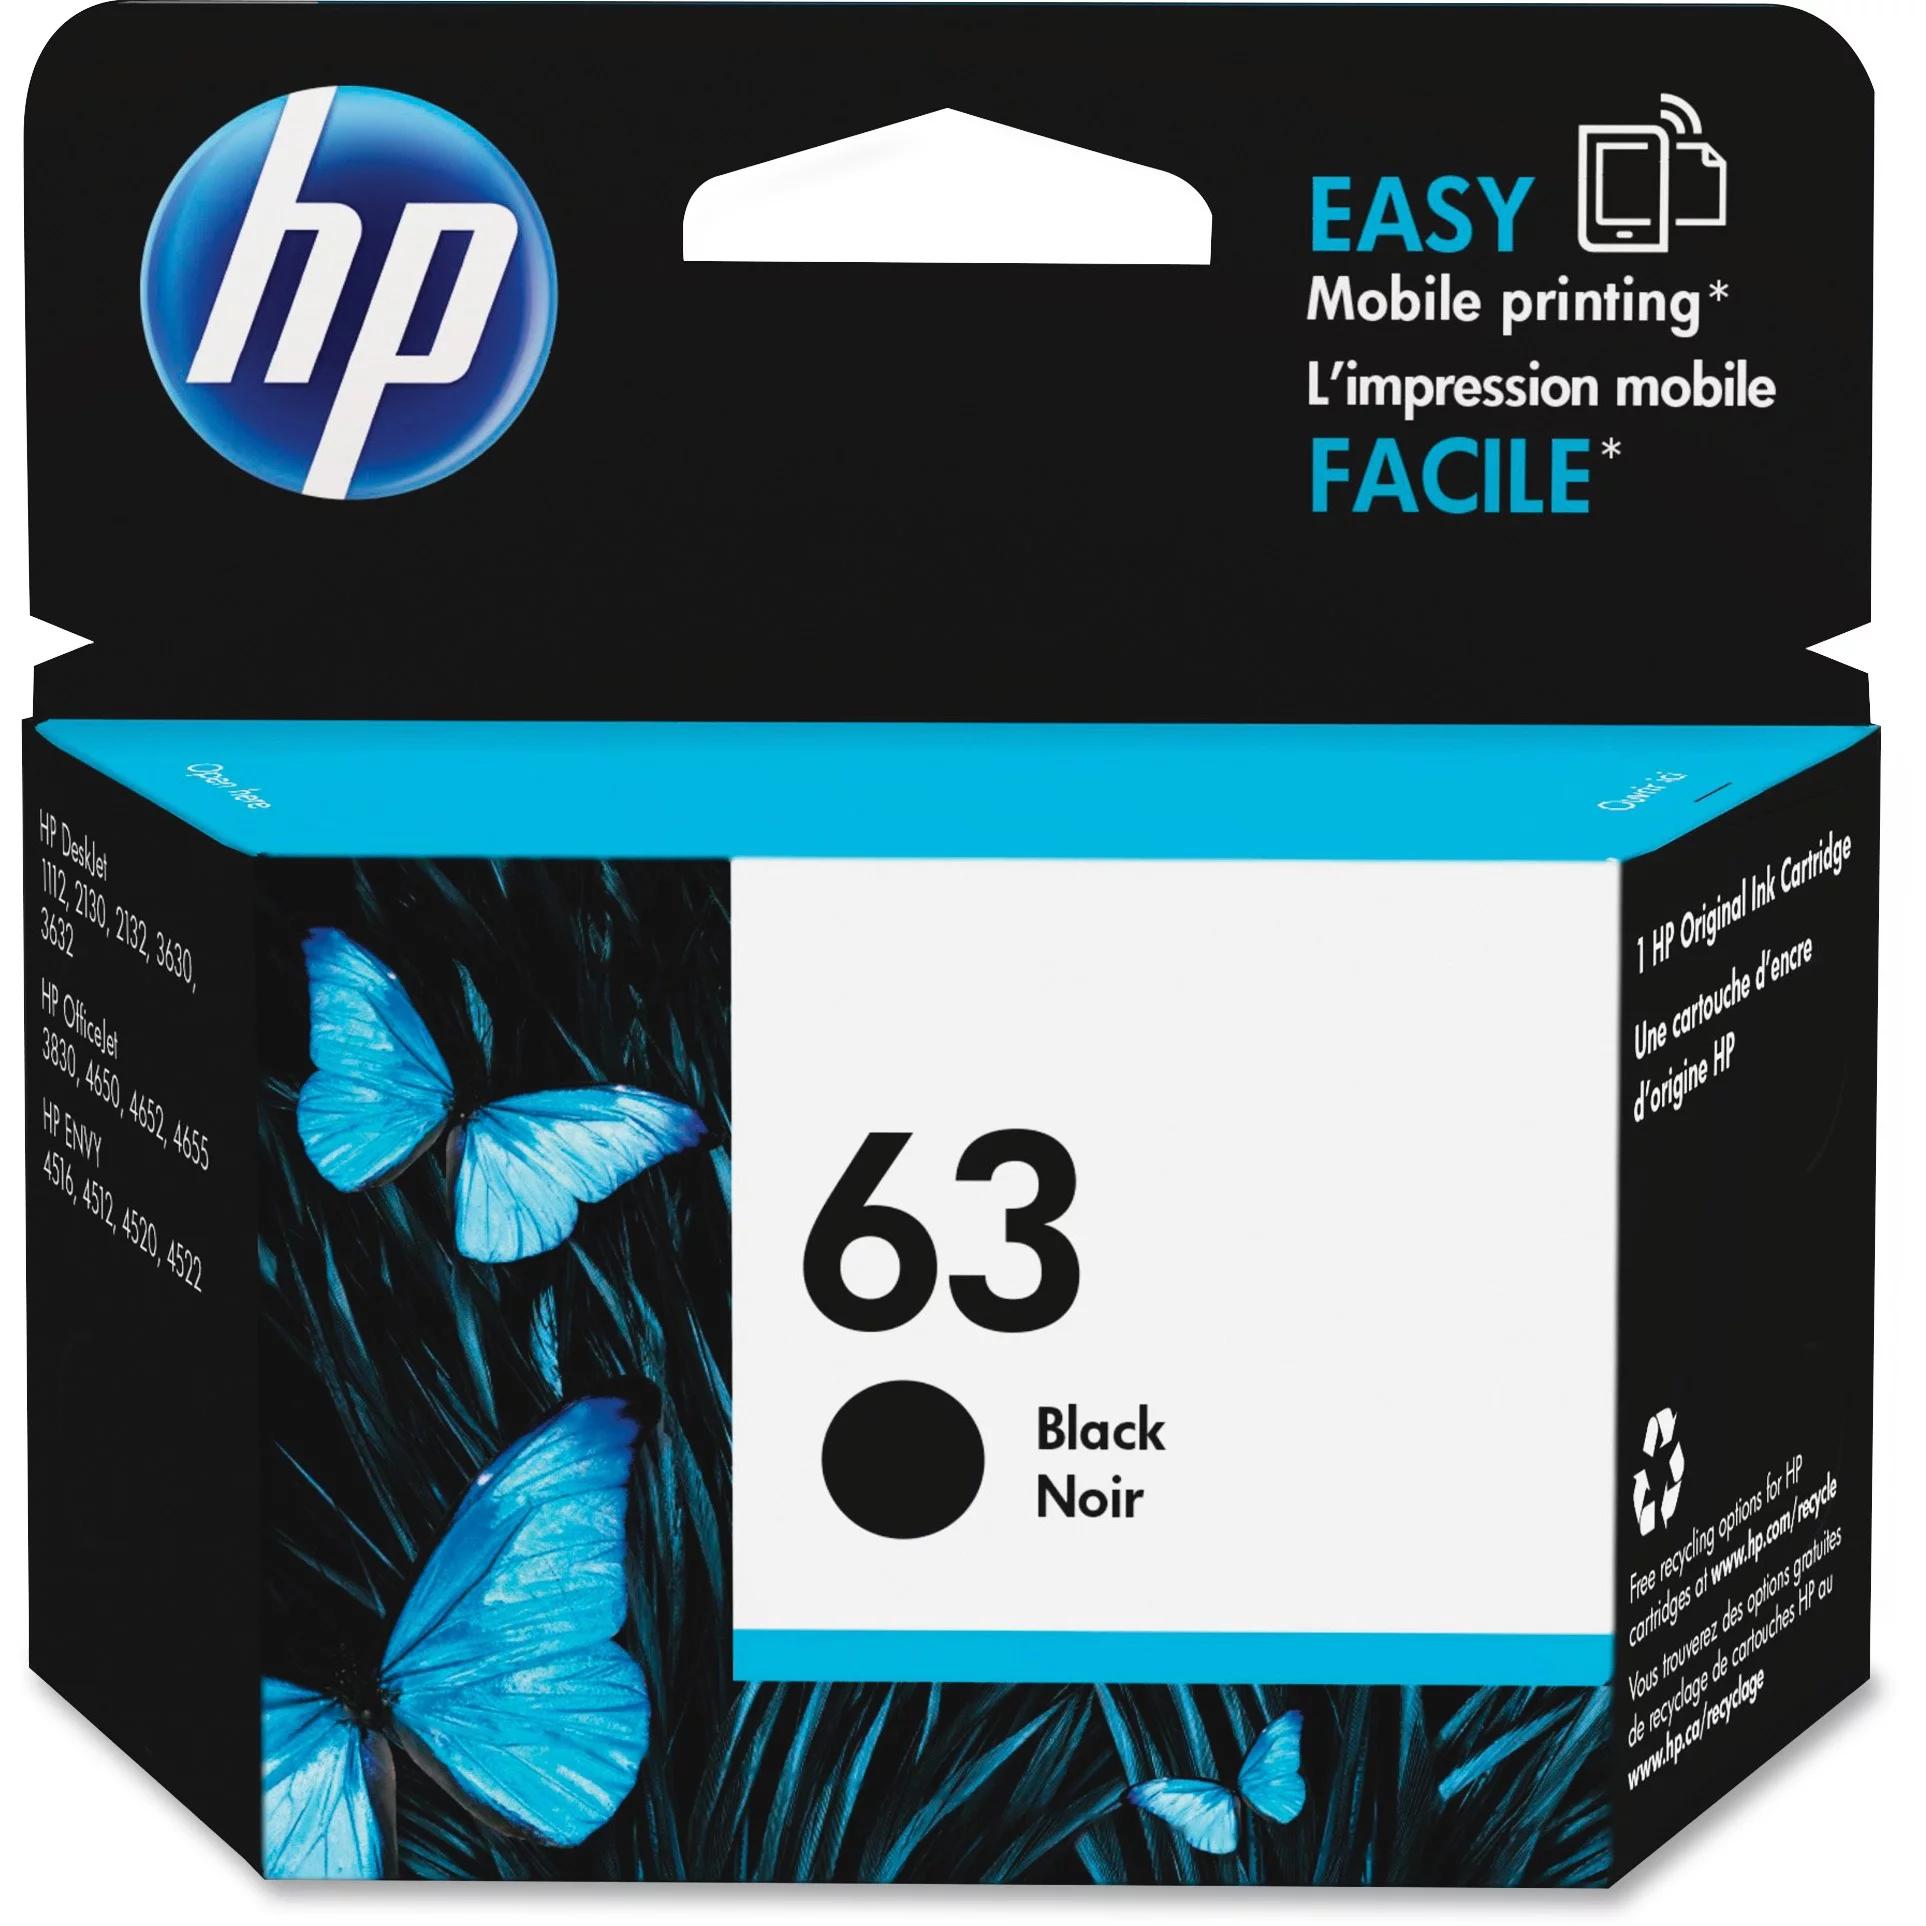 Hp inkjet cartridge 63: everything you need to know